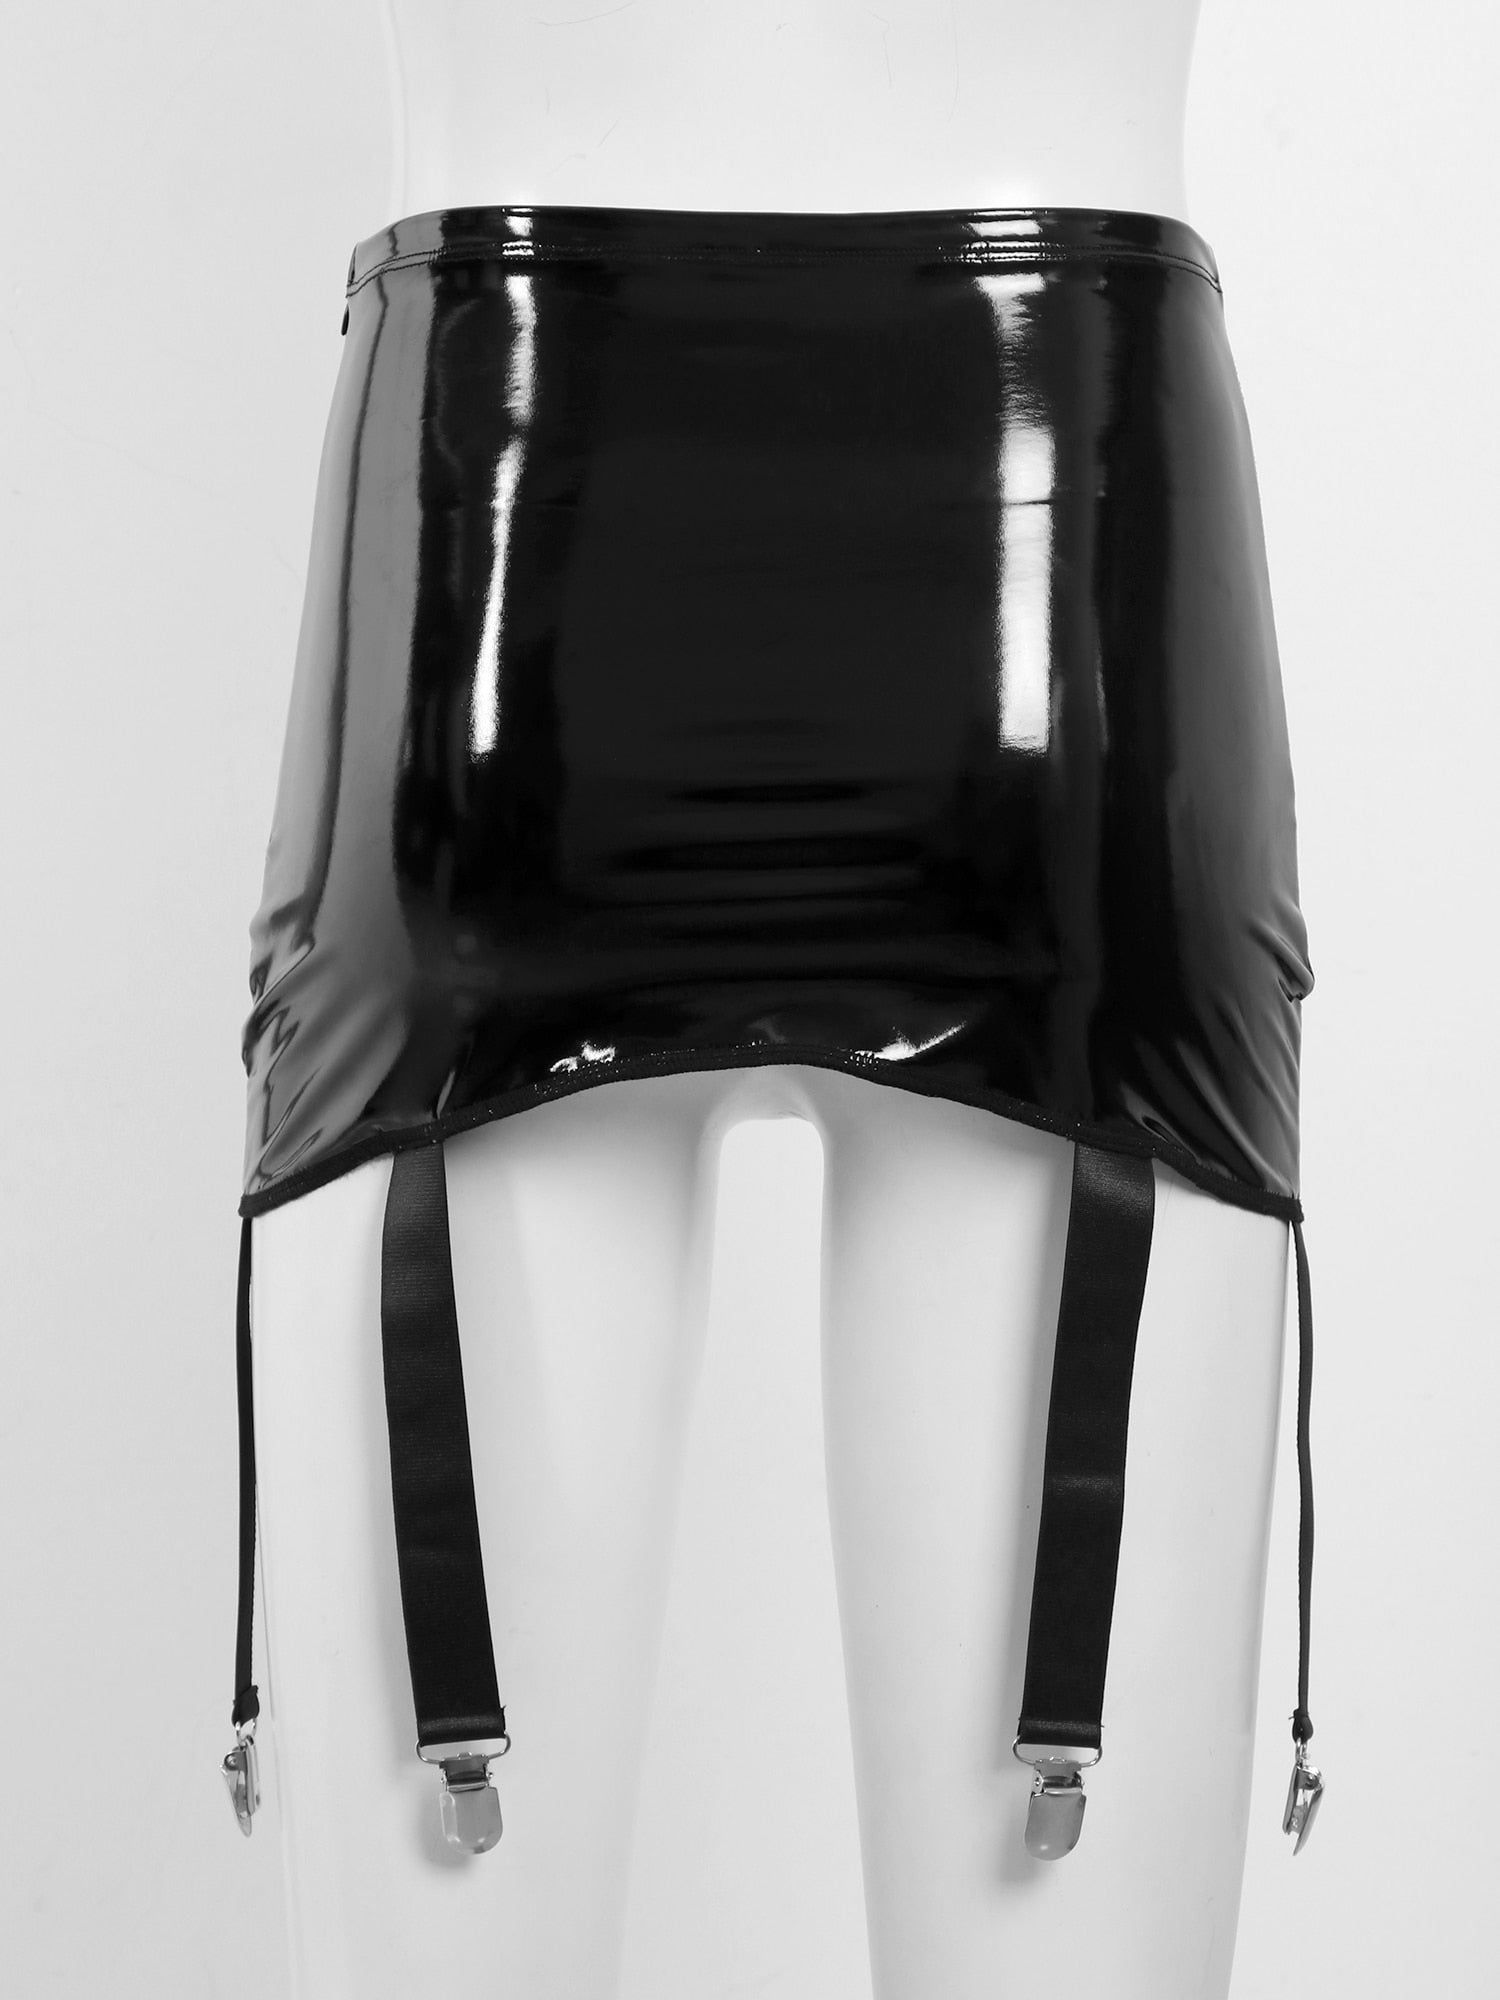 Patent Leather Skirts Wet Look